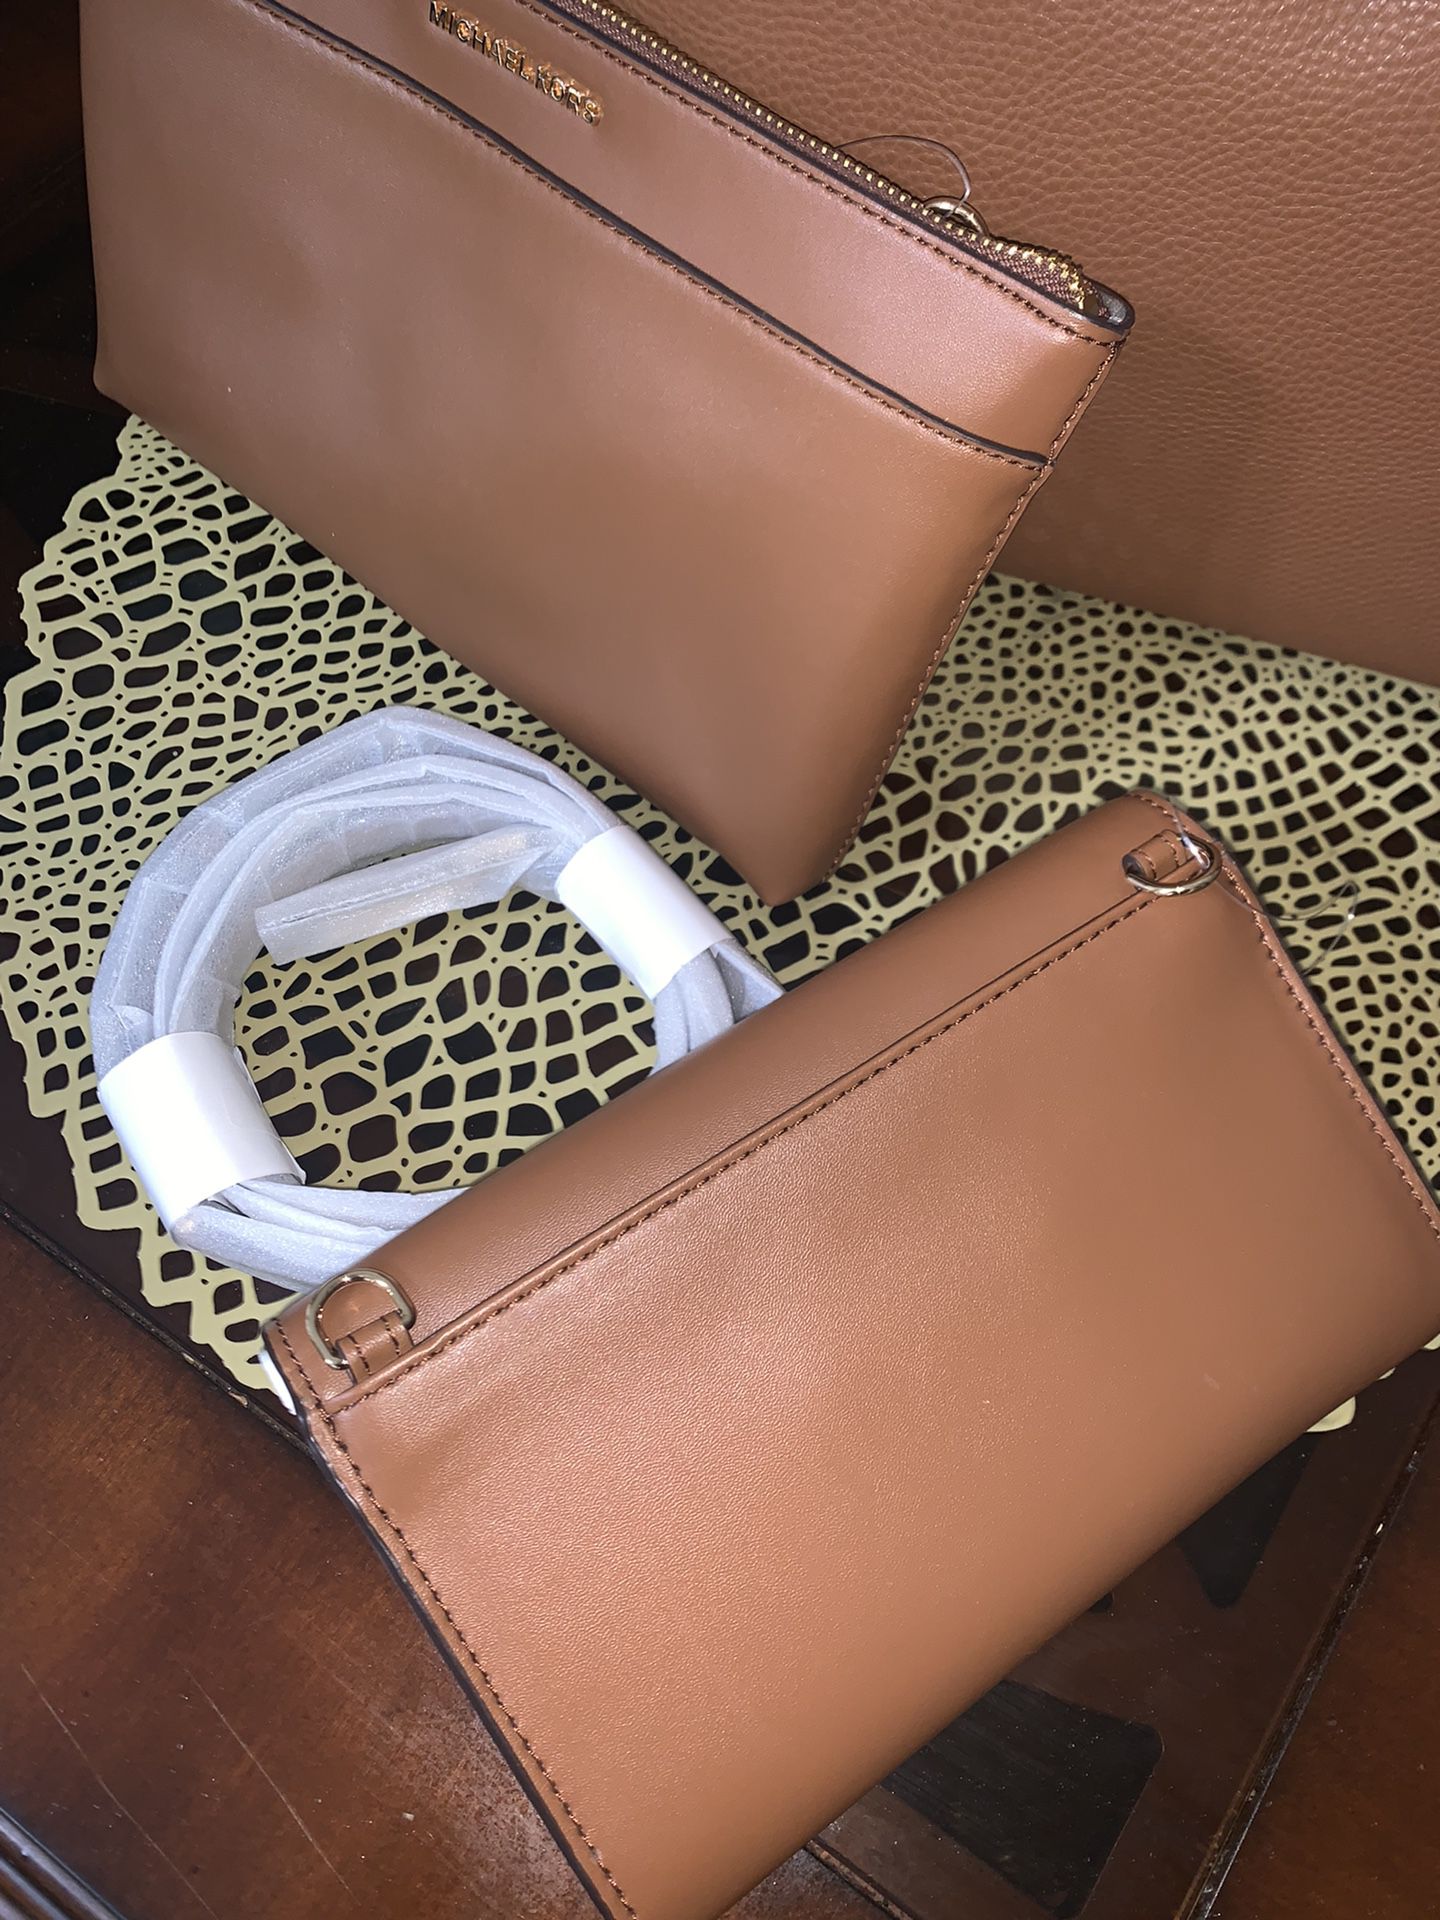 Kimberly Large Faux Leather 3-in-1 Tote Bag Set